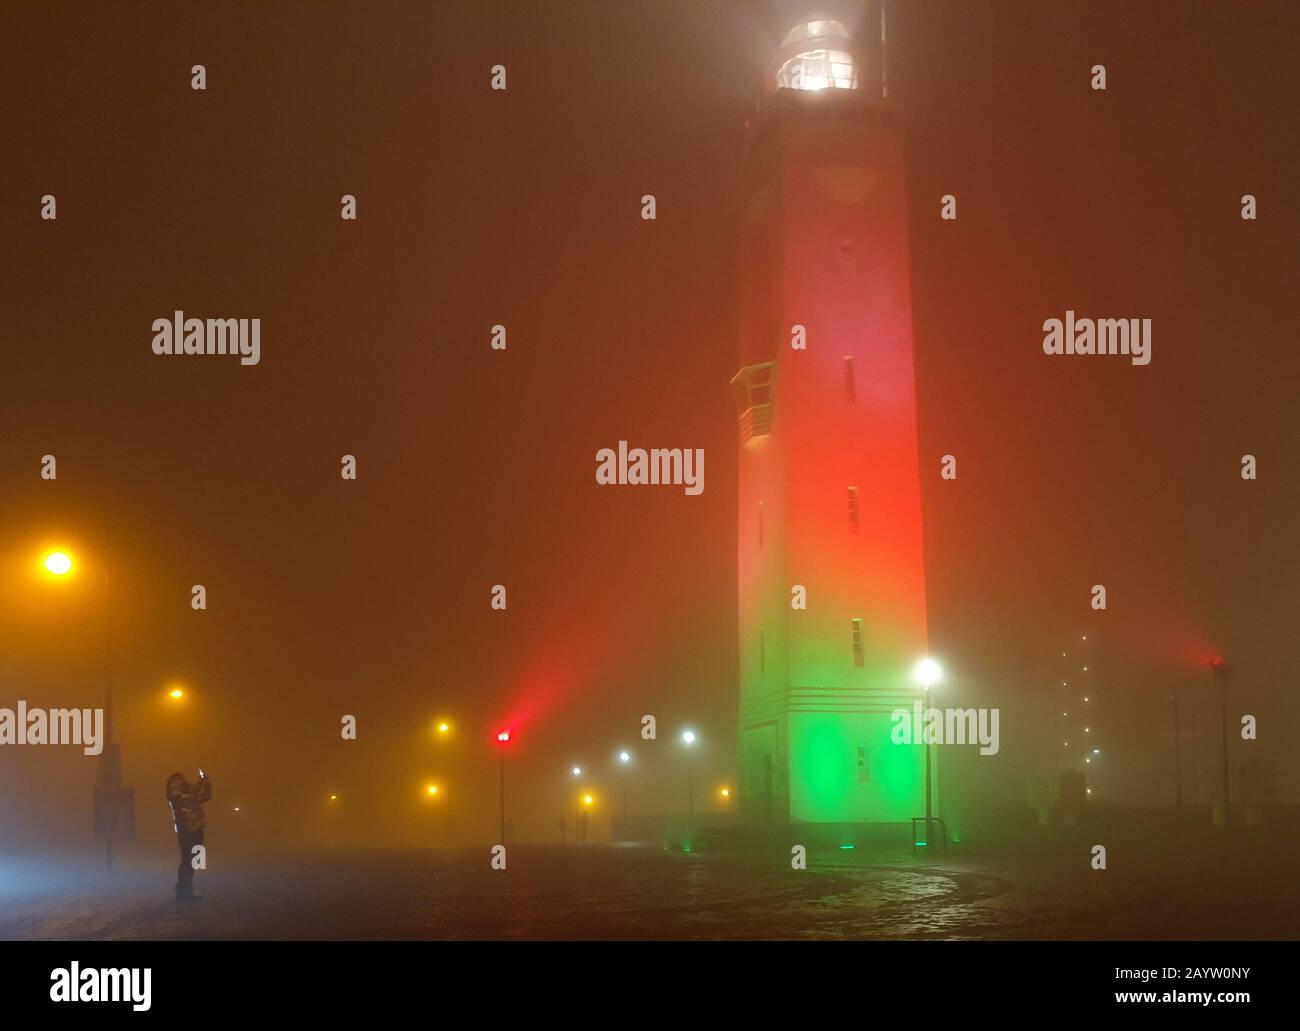 woman taking pictures of the illuminated lighthouse in the mist, Netherlands, Noordwijk aan Zee Stock Photo